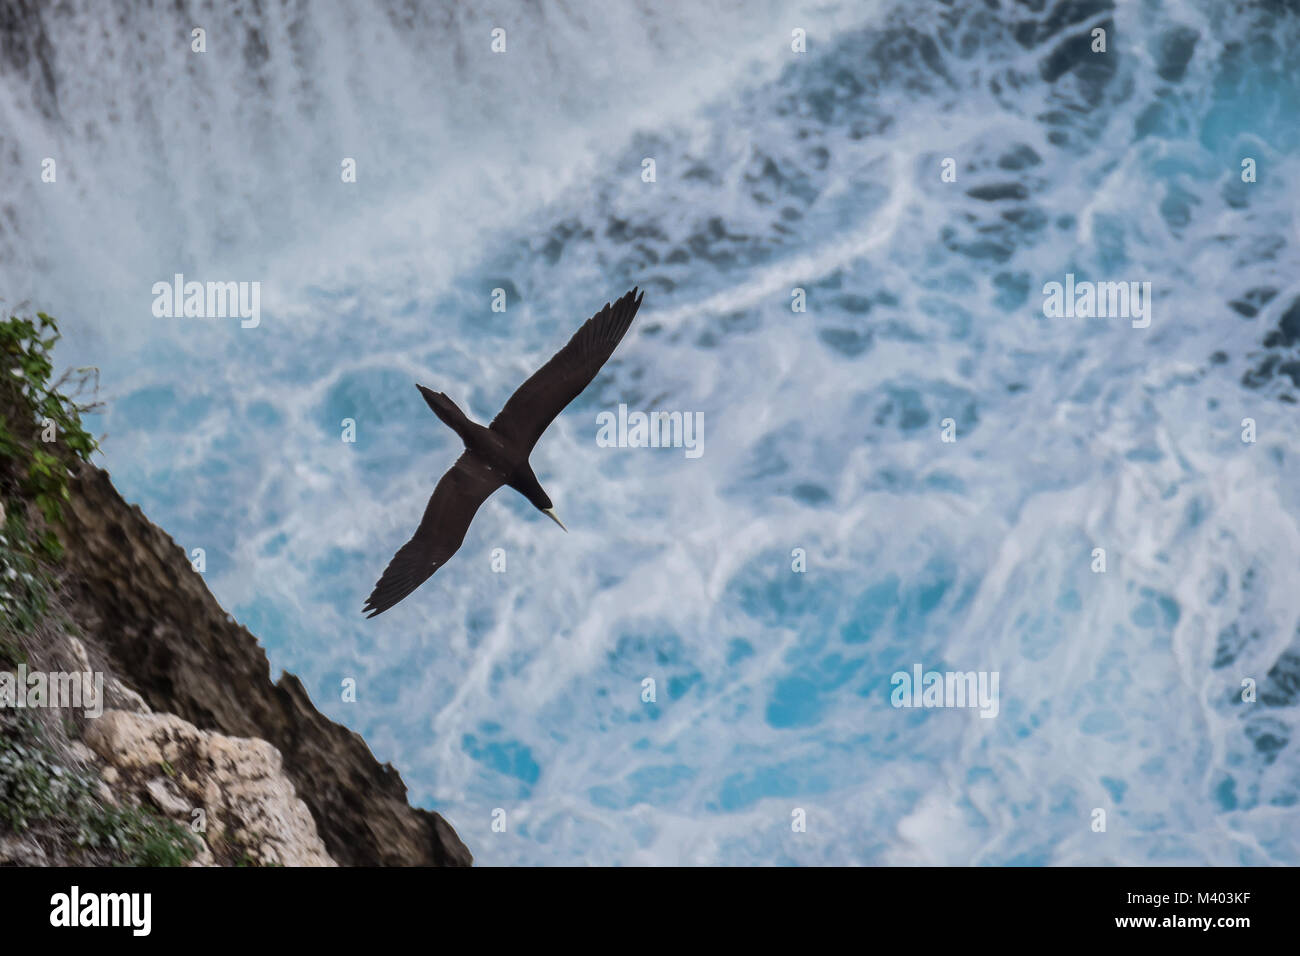 Brown booby (Sula leucogaster) seabird flying near a cliff over a wild blue ocean in Tonga Stock Photo